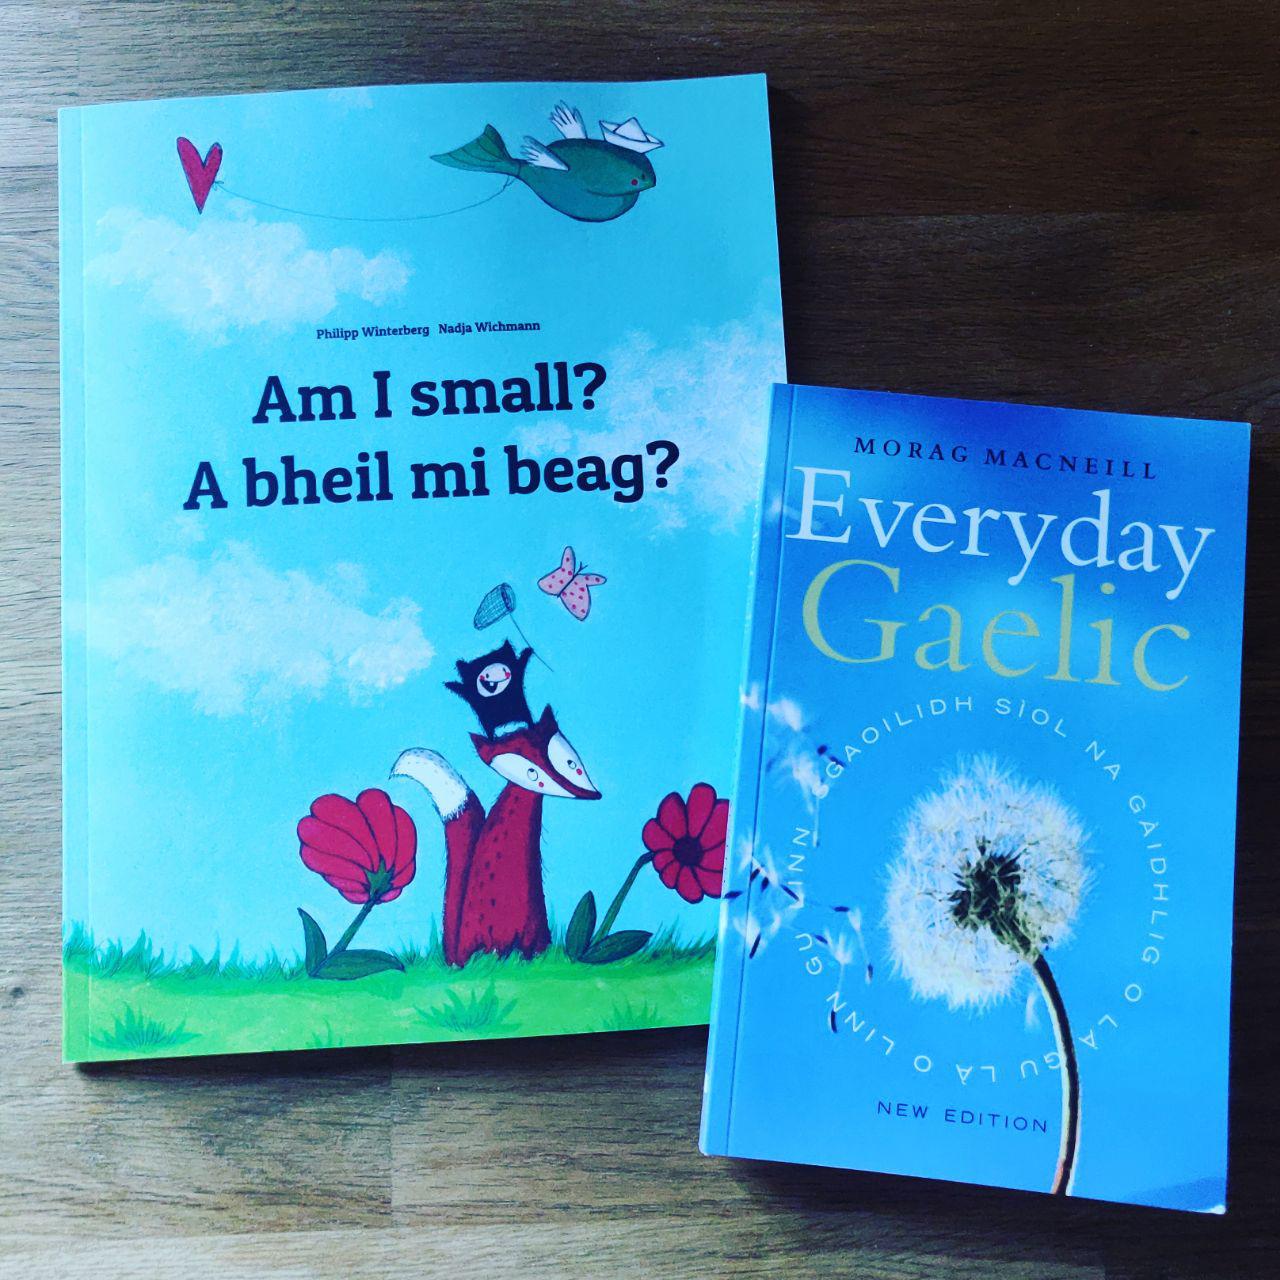 Everyday Gaelic and Am I small?